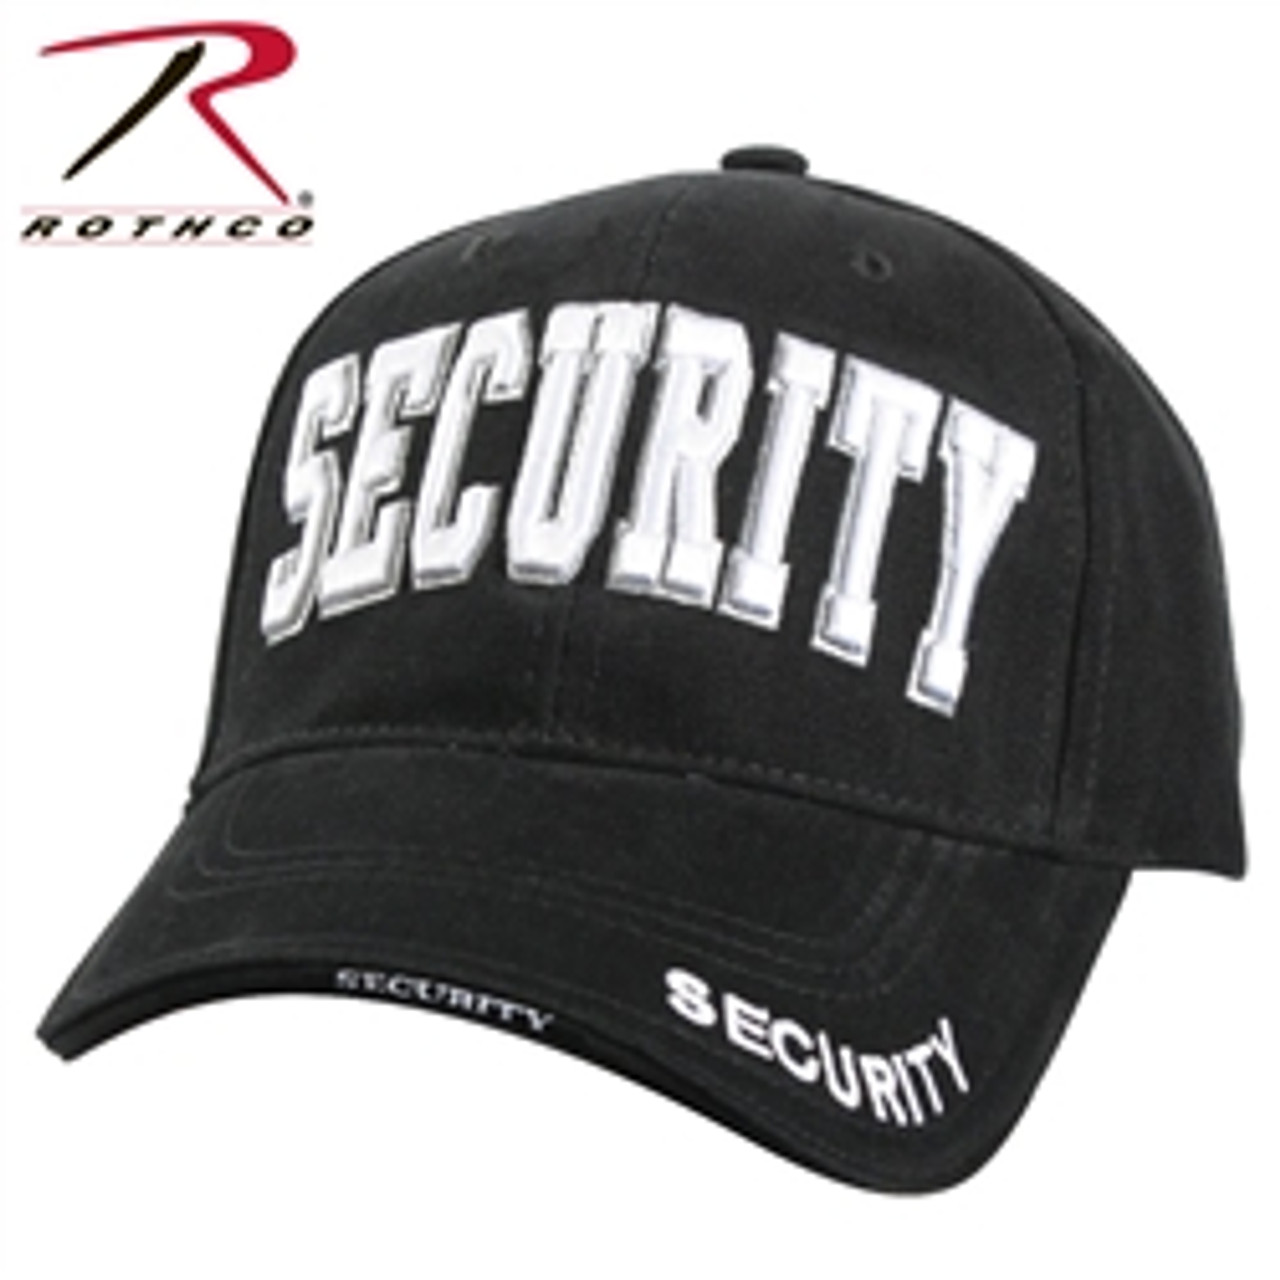 Security - Rothco Cap